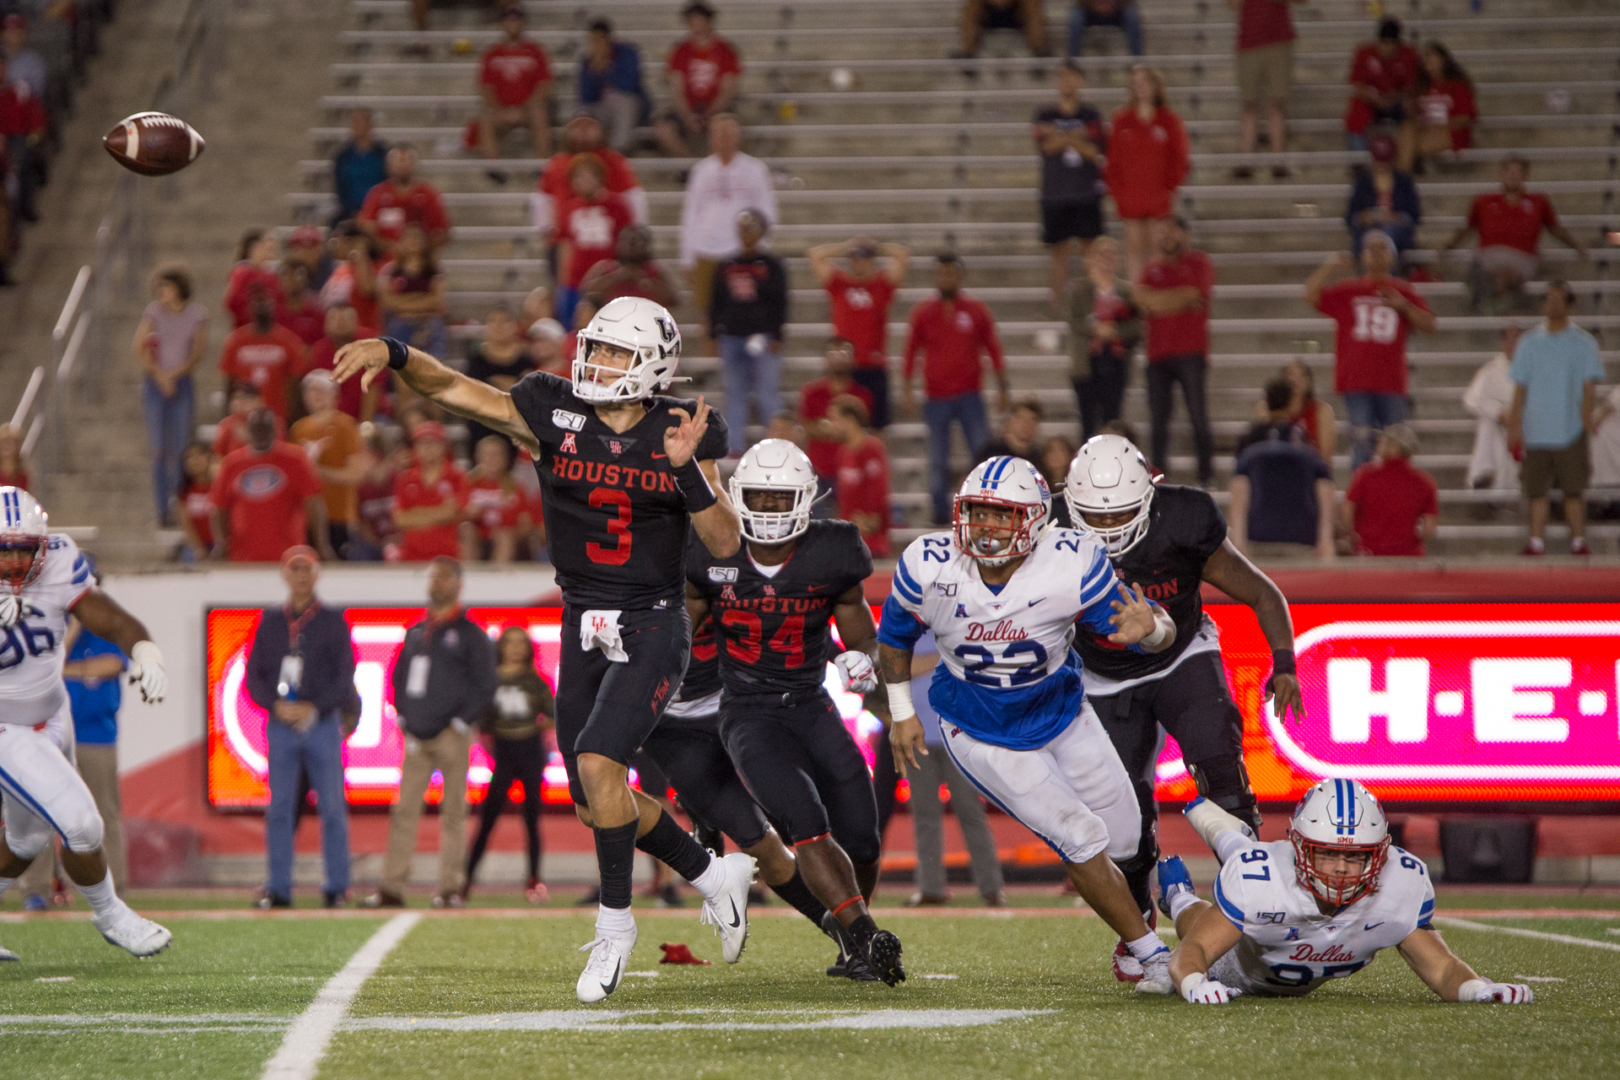 UH junior quarterback Clayton Tune airs out a pass against SMU during the 2019 season. | Trevor Nolley/The Cougar